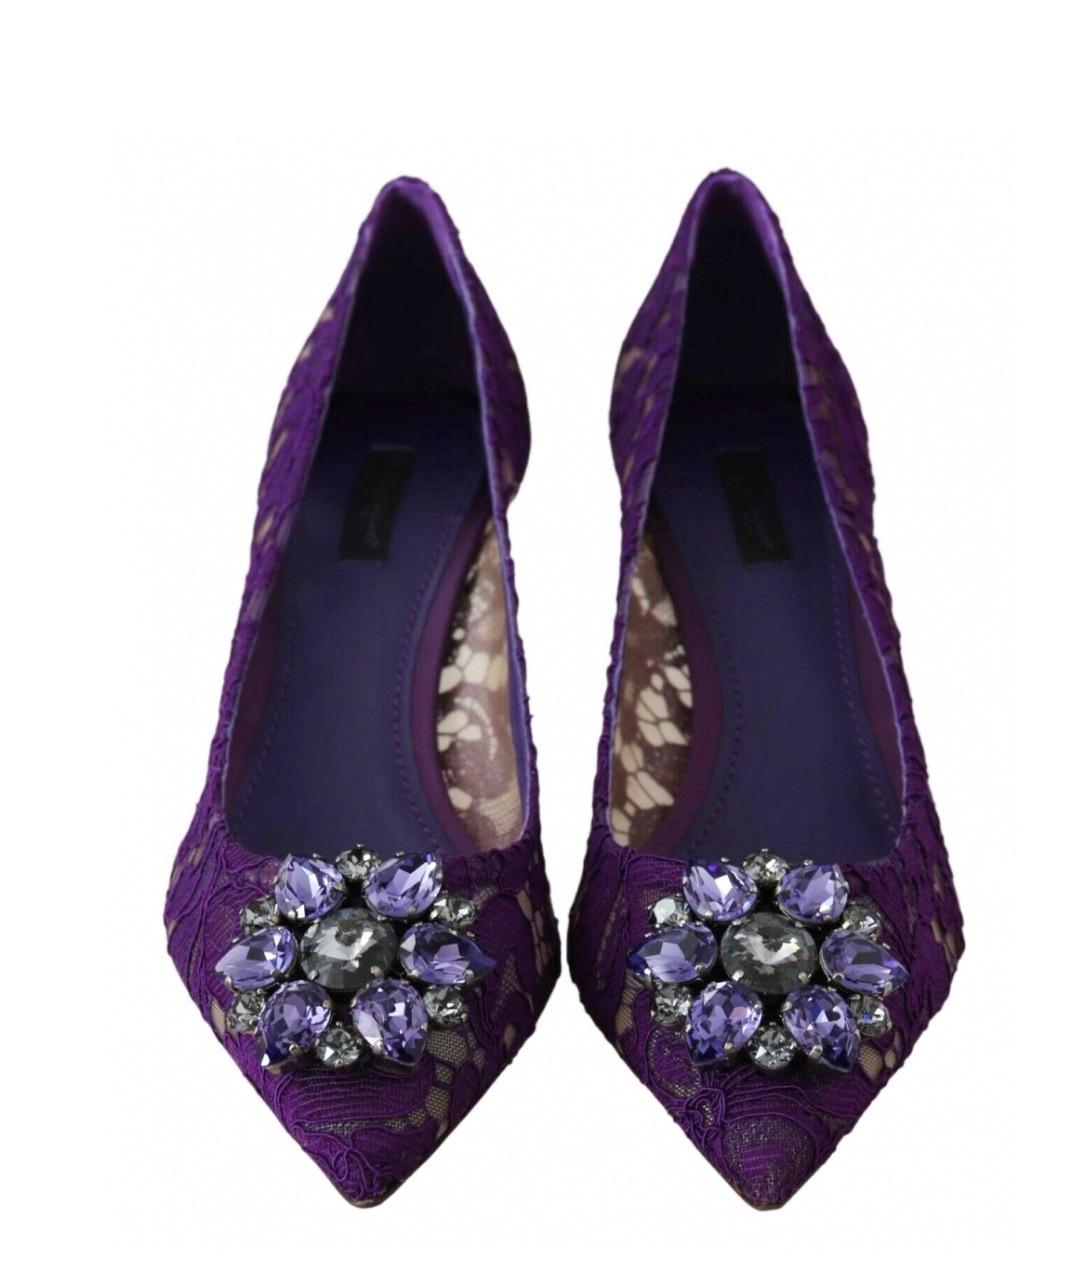 Women's Dolce & Gabbana purple PUMP lace
shoes with jewel detail on the top heels  For Sale